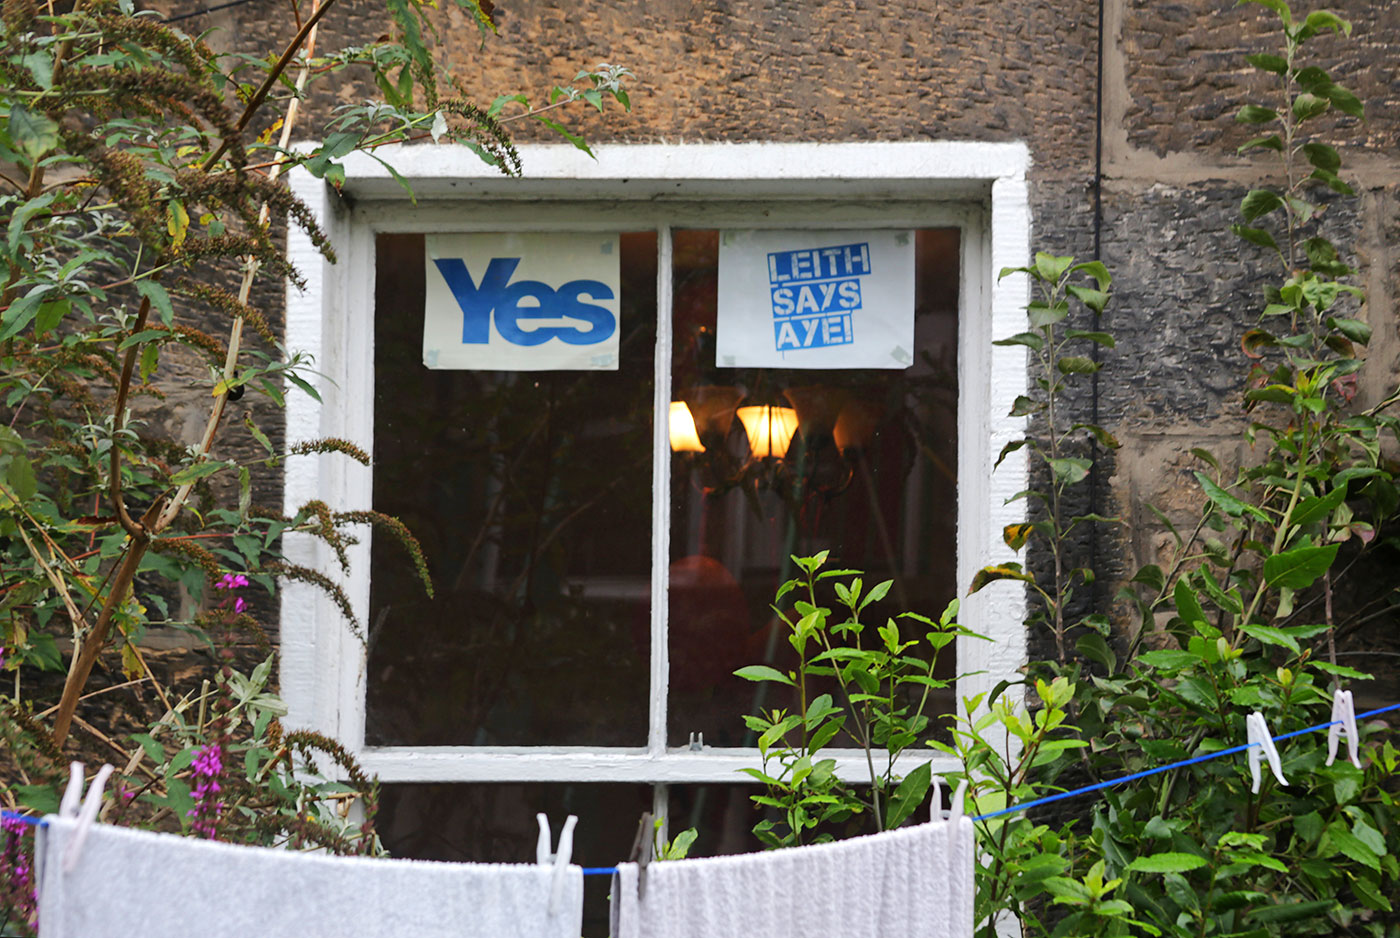 Photos taken in Edinburgh on voting day in the  Scottish Indepemdence Referendum on 18 September 2014  -  'Yes' Campaign Posters at Abbeyhill